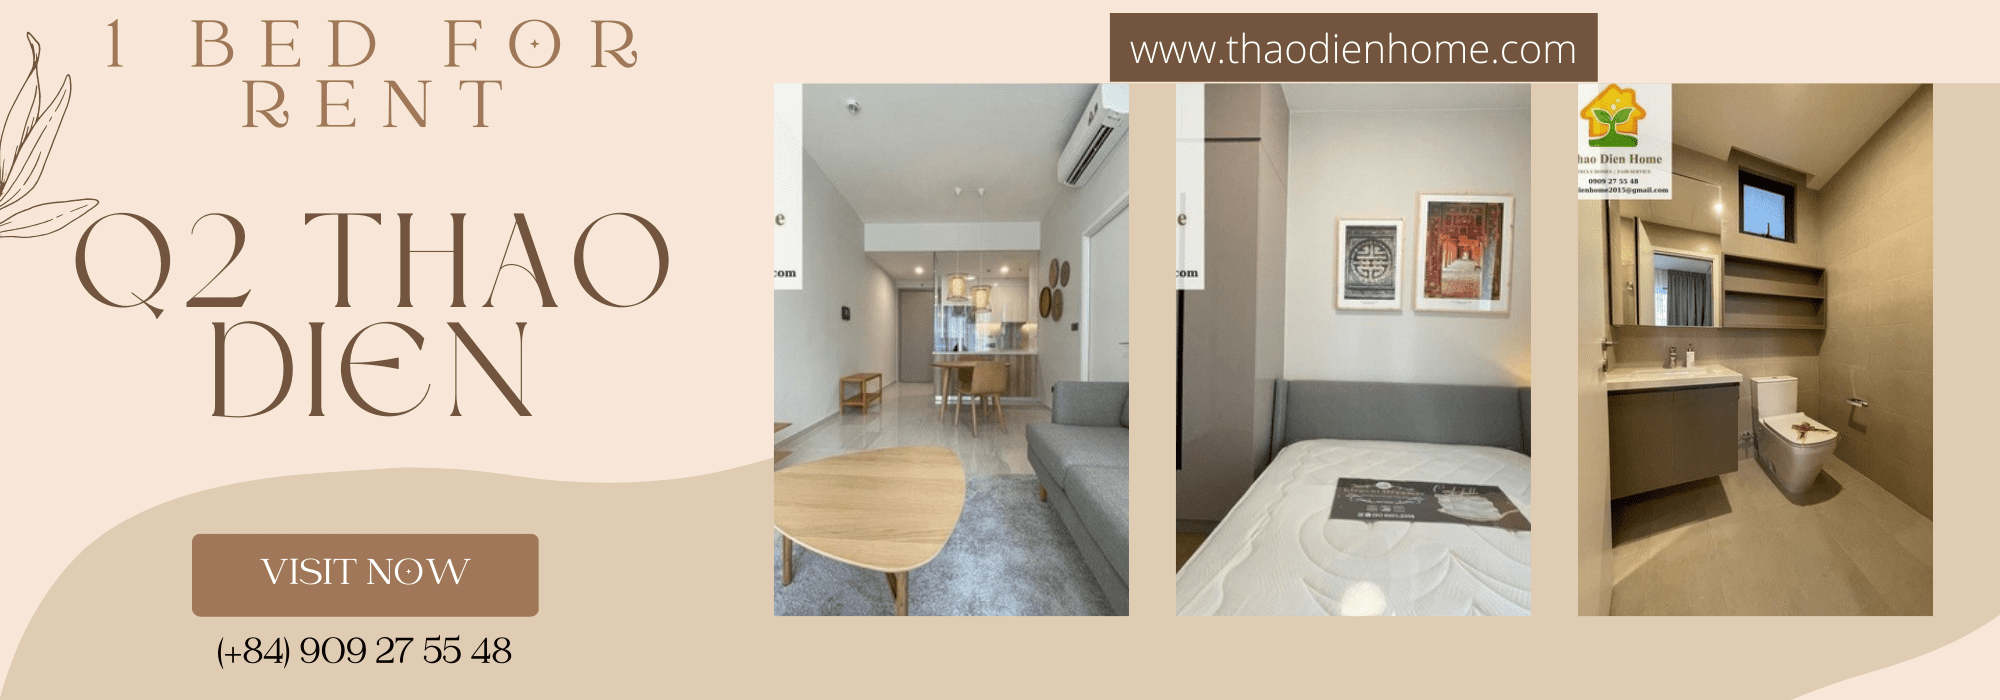 Lovely Decor With Fashionating Style In This Superior Q2 Thao Dien Apartment For Rent